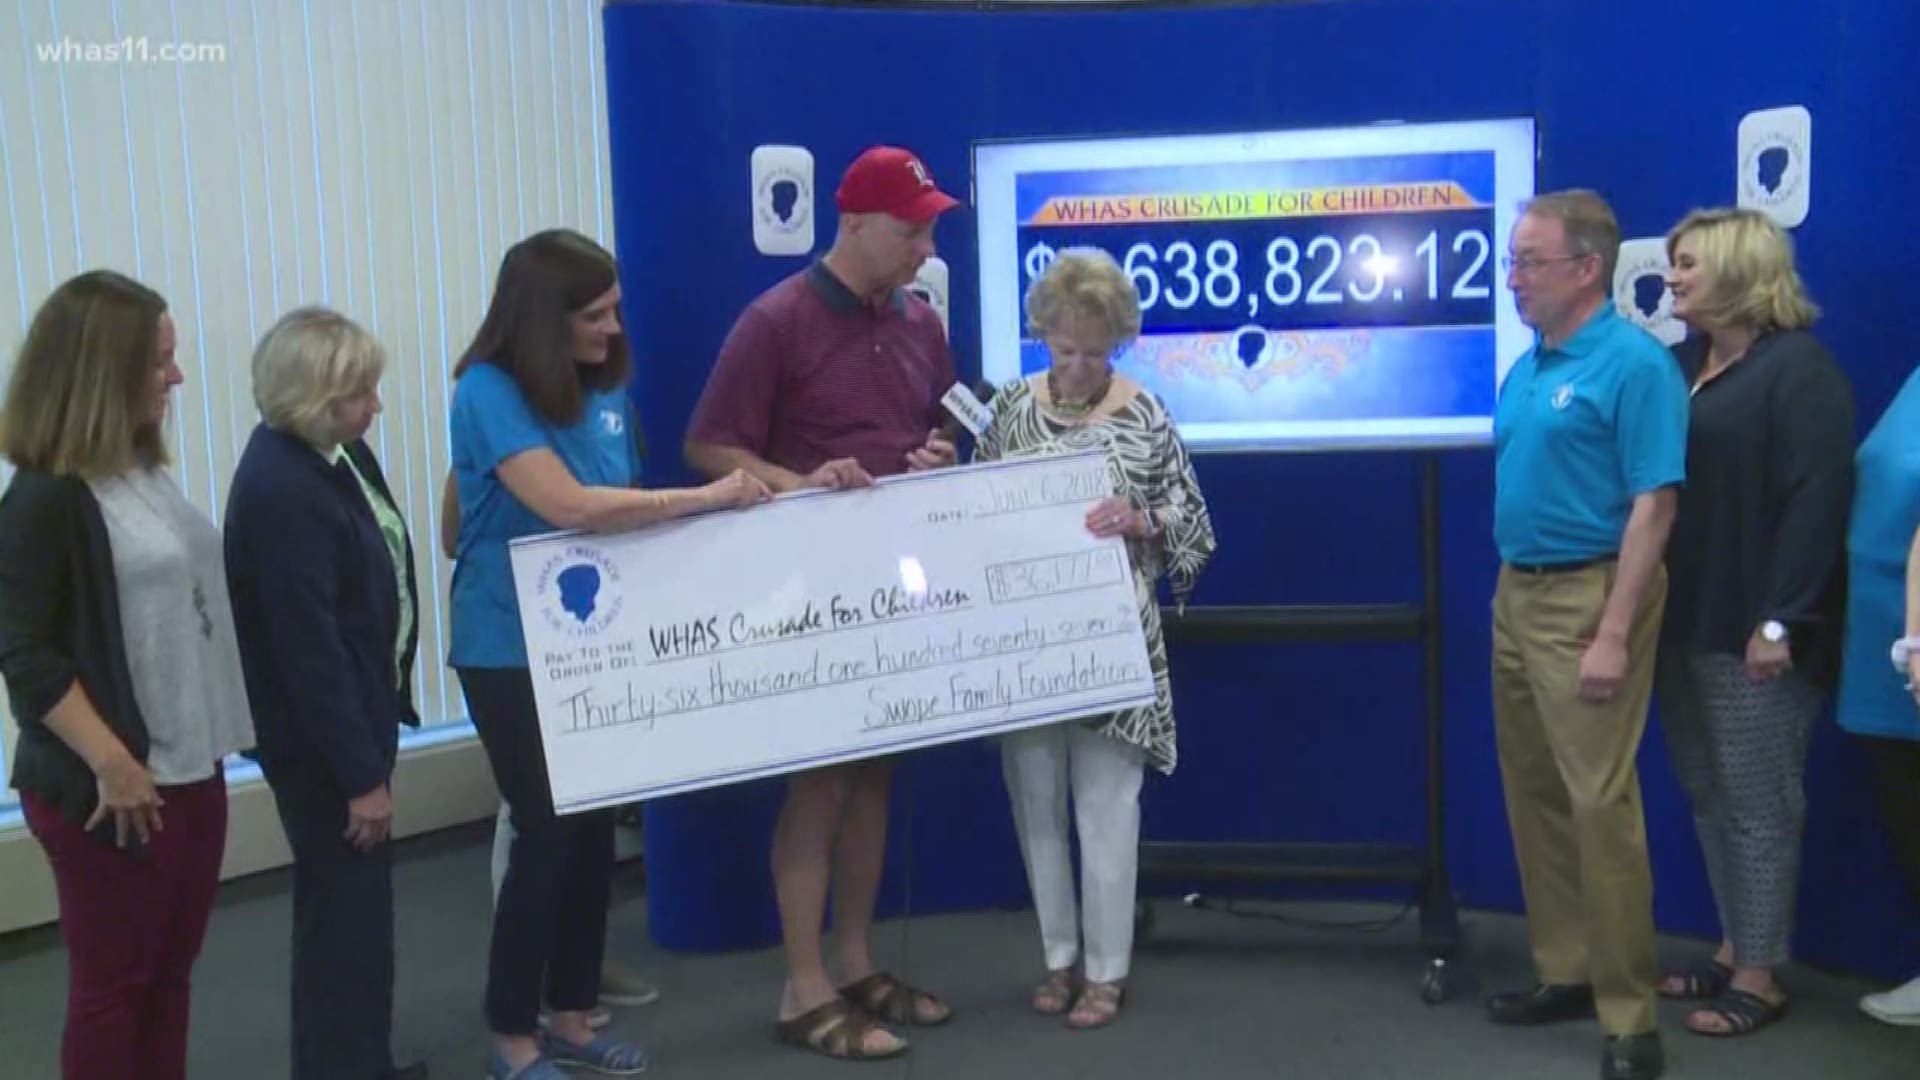 The widow of Sam Swope Marlys Swope donated more than $36,000 to the cause.